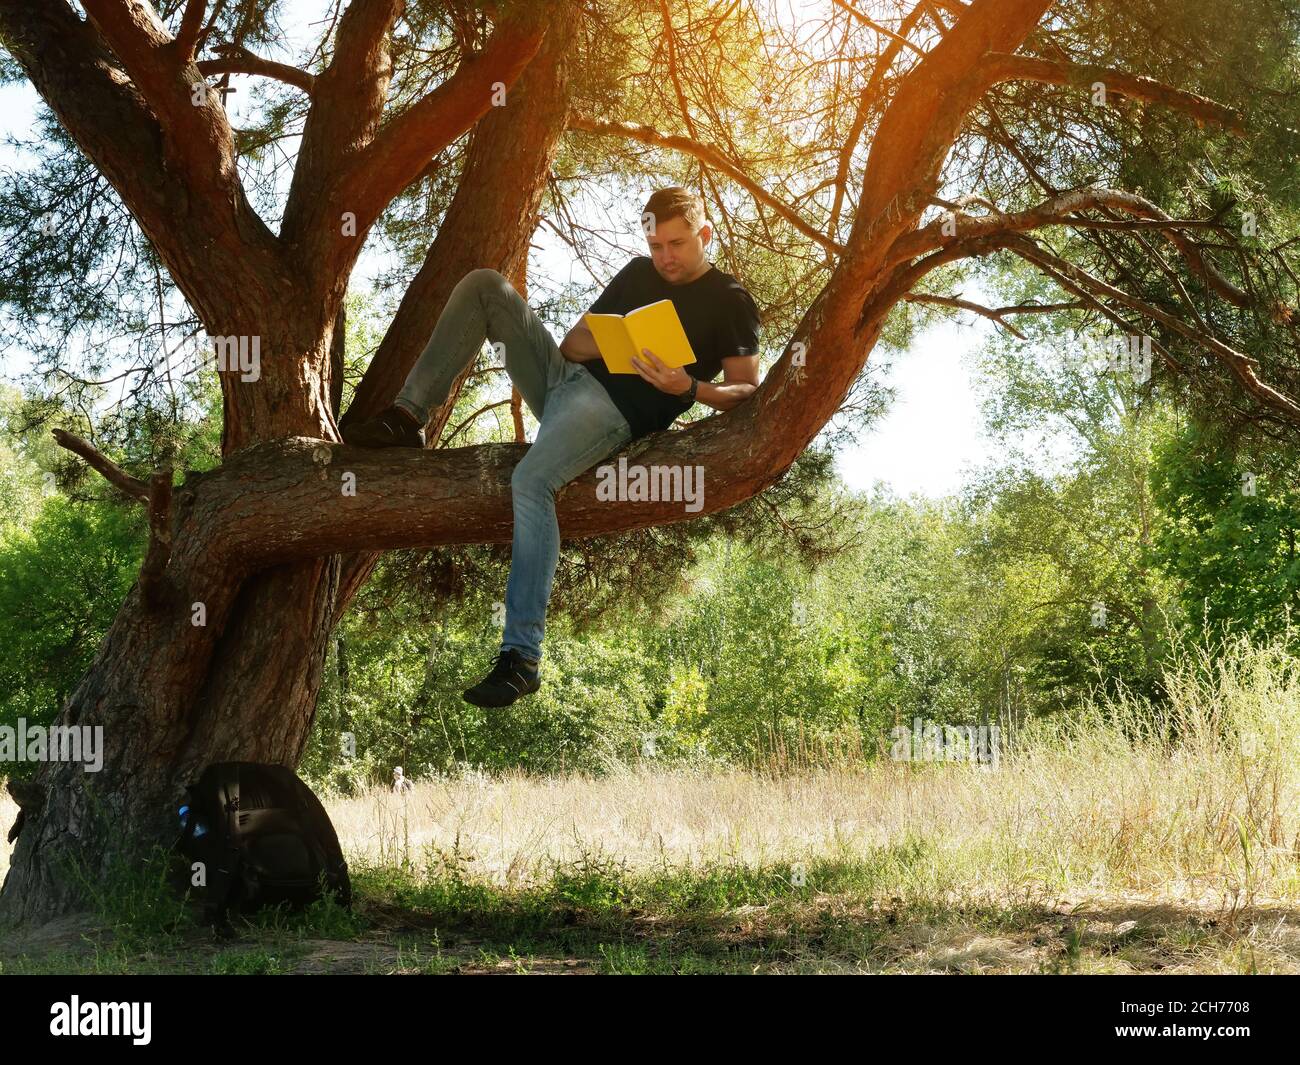 Summer vacation in the forest. The guy in the tree is reading a book. Stock Photo